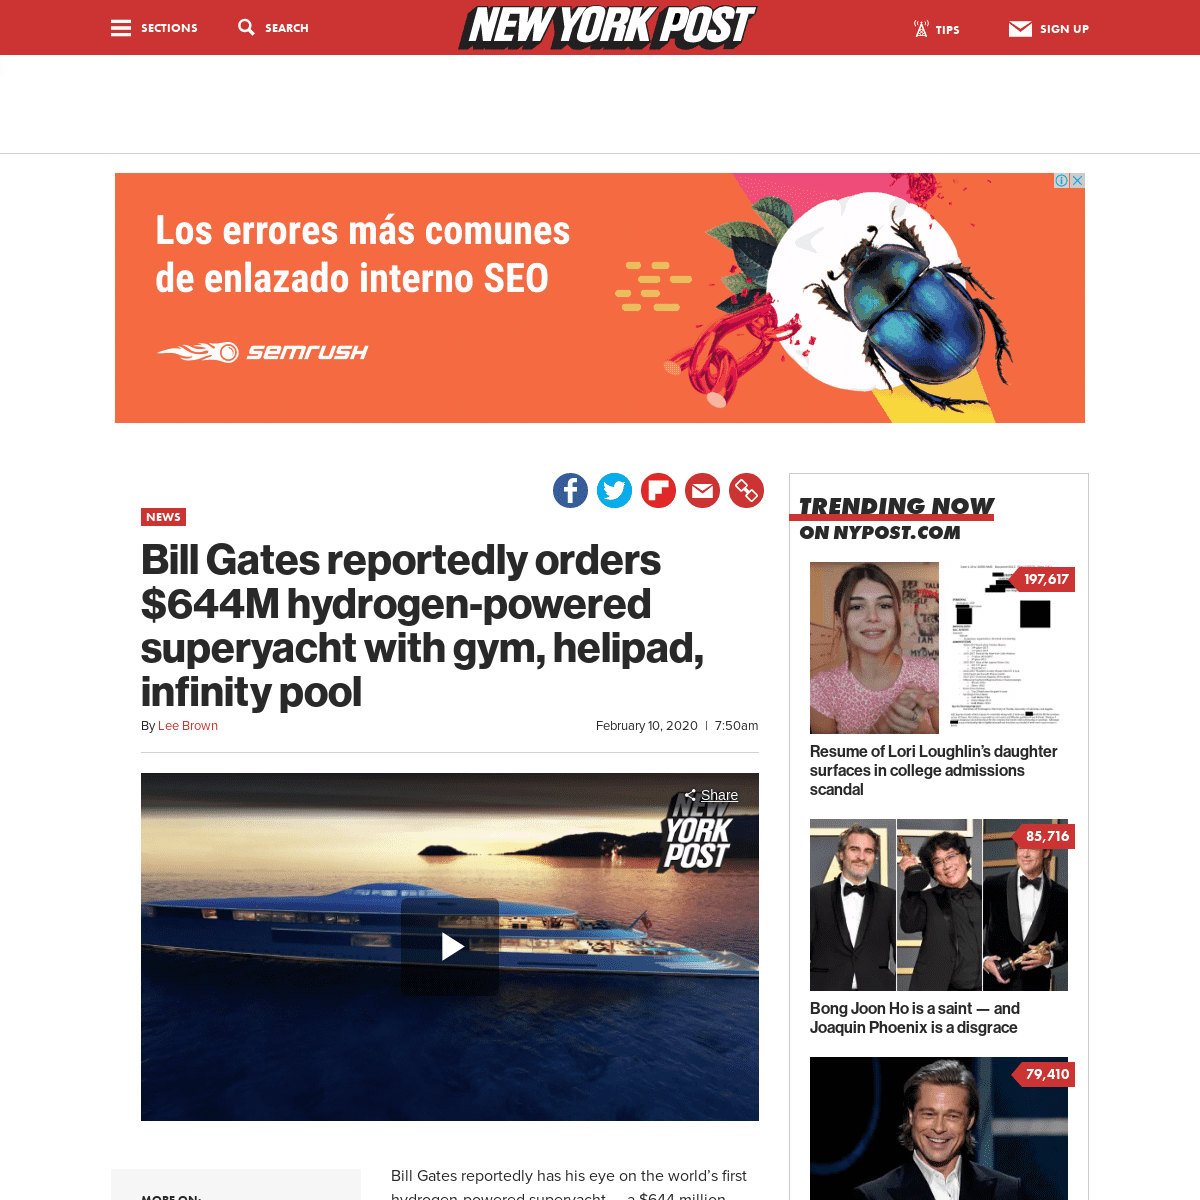 A complete backup of nypost.com/2020/02/10/bill-gates-orders-644-million-hydrogen-powered-superyacht-with-gym-helipad-infinity-p